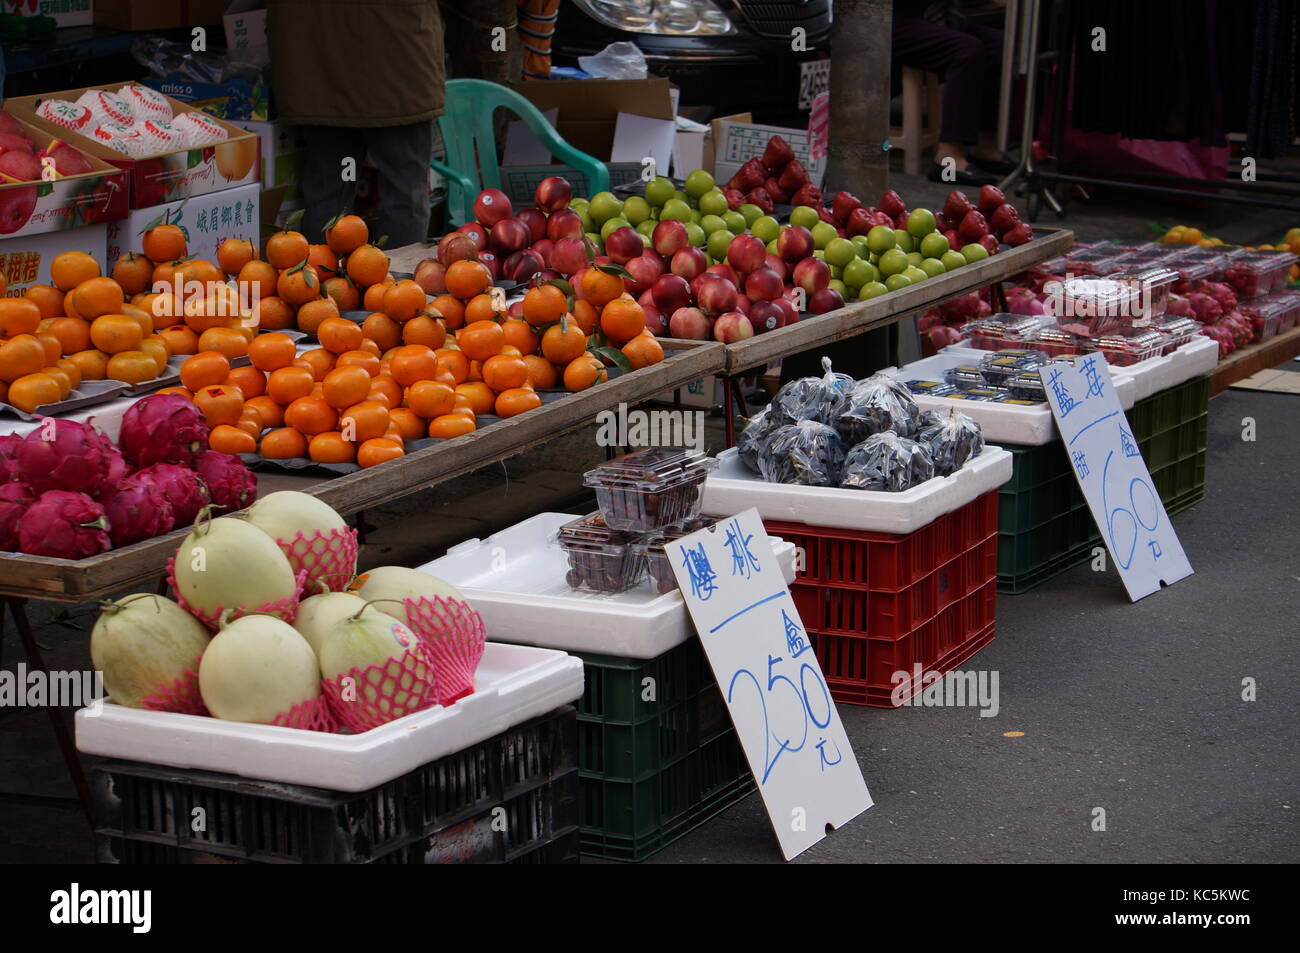 Fresh fruit is for sale in Taipei, Taiwan market Stock Photo